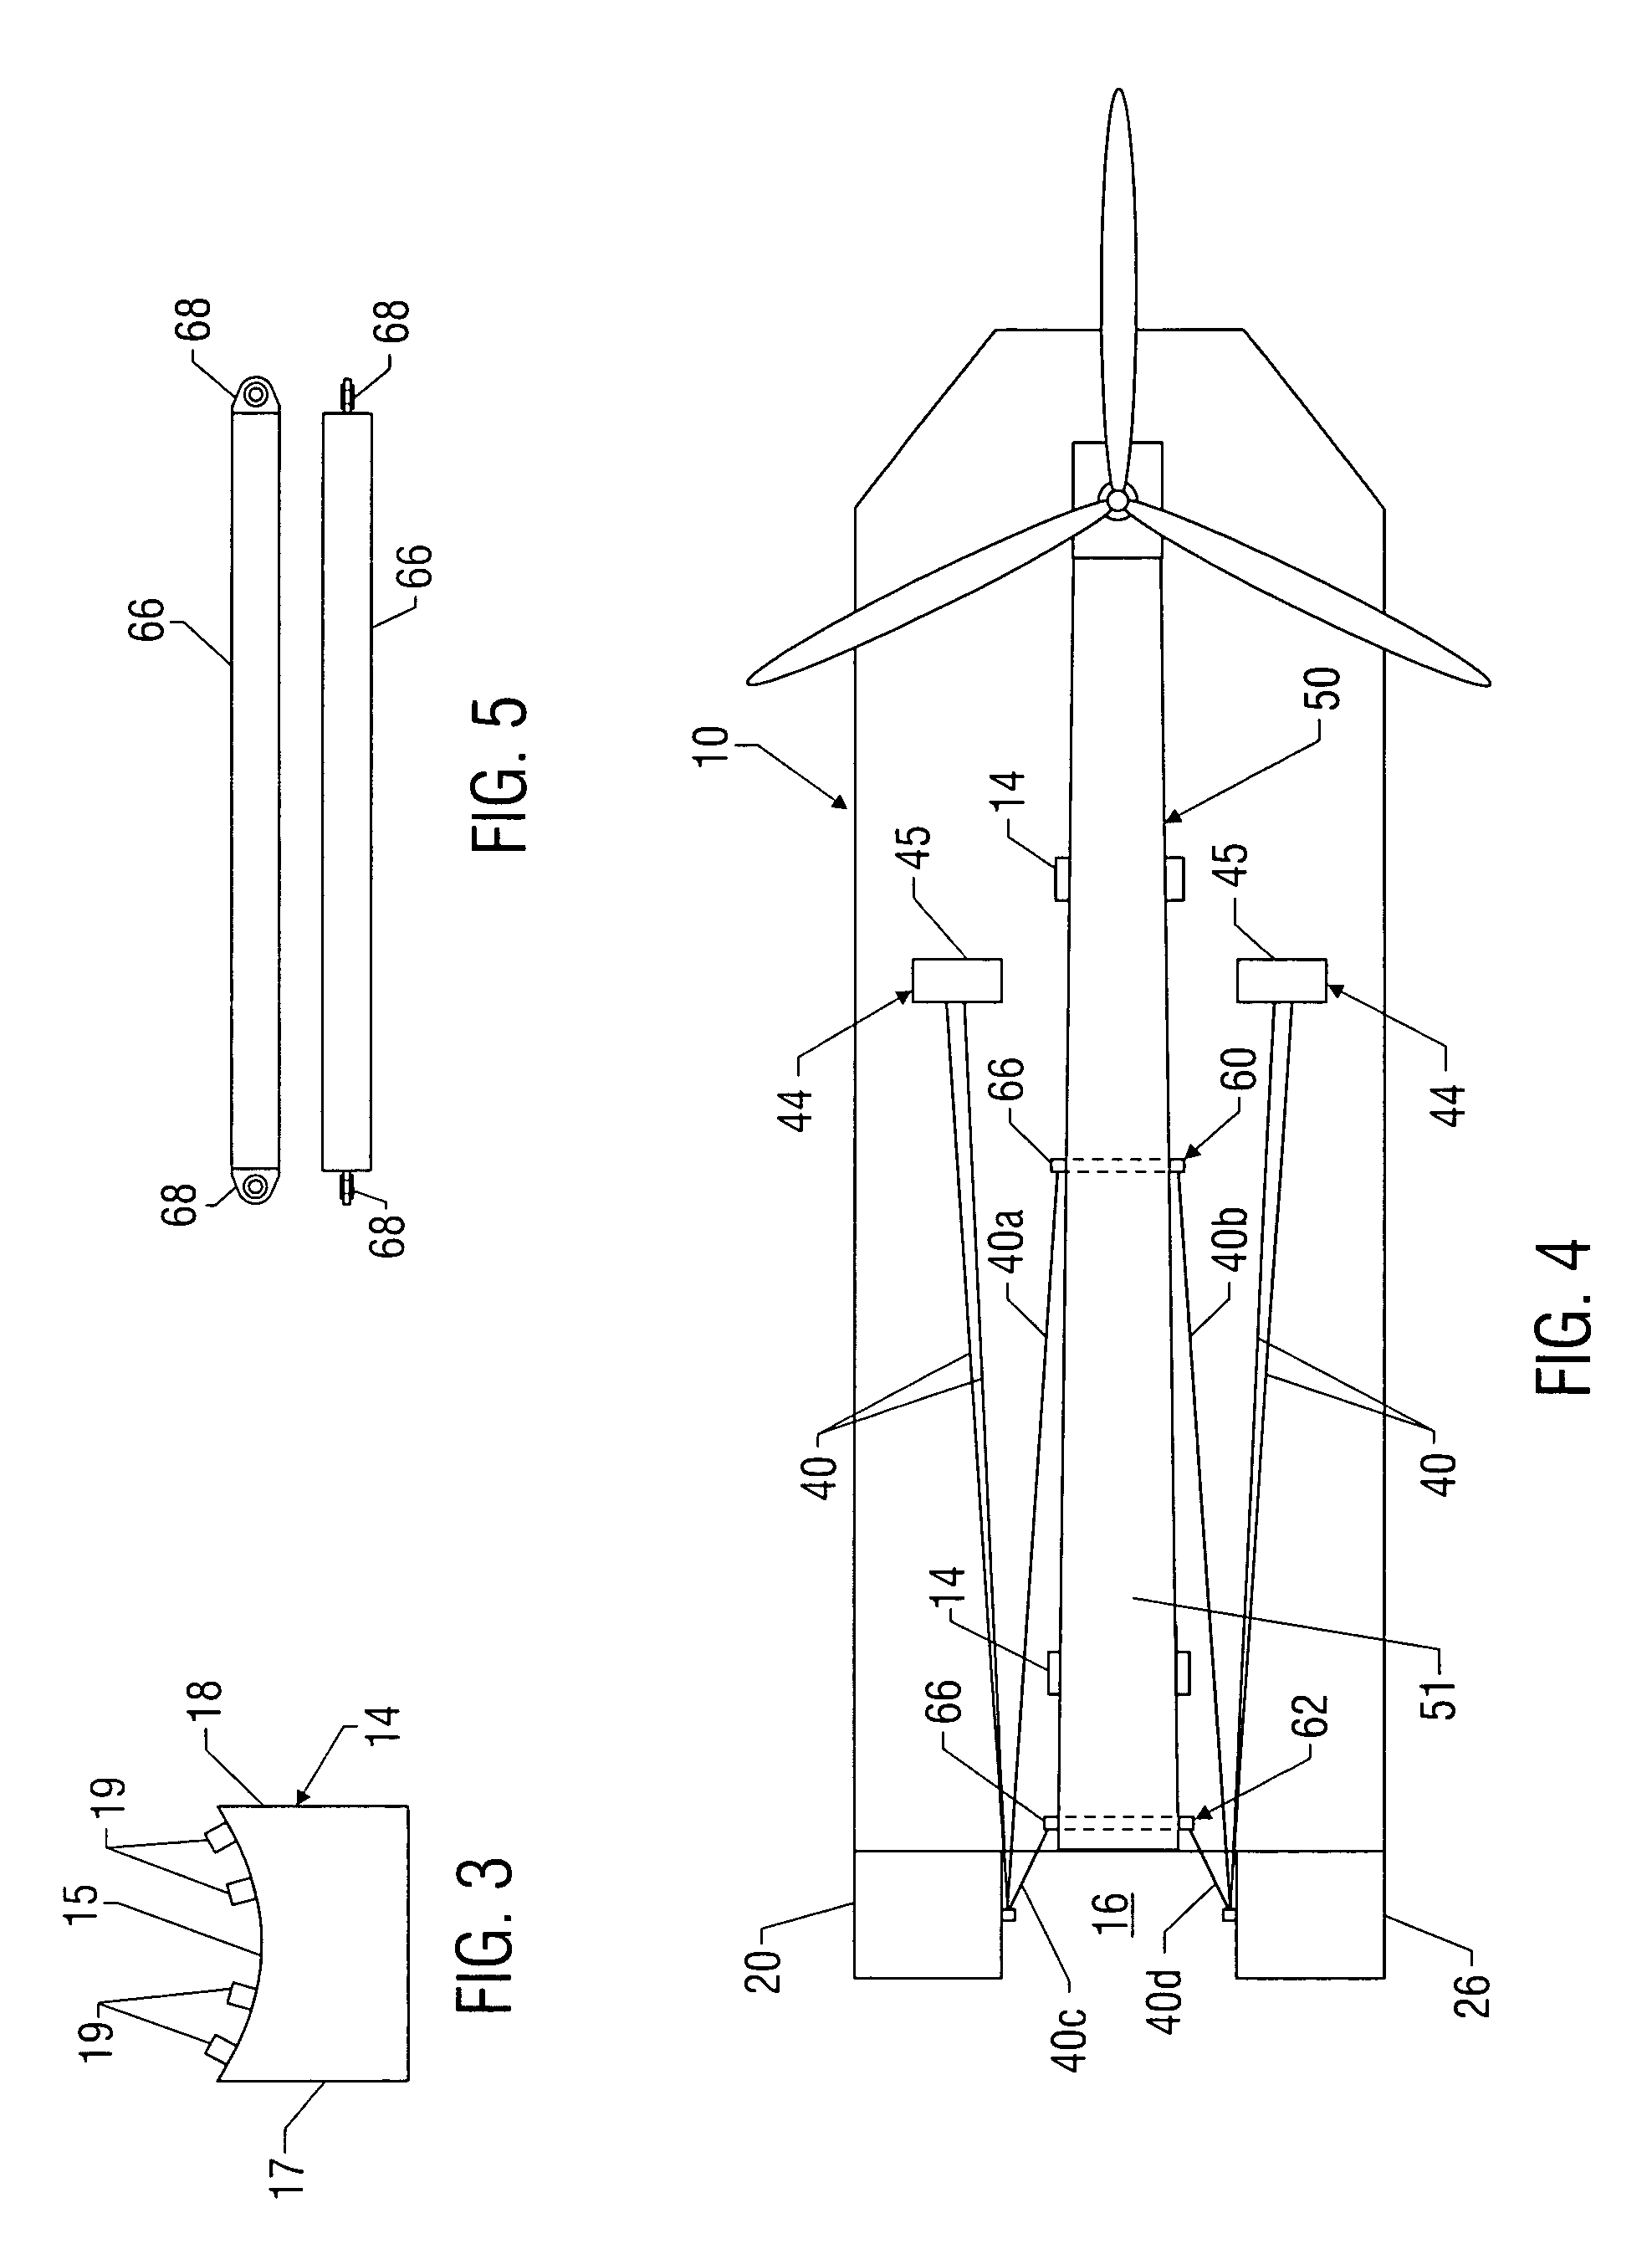 Apparatus, systems and methods for erecting an offshore wind turbine assembly